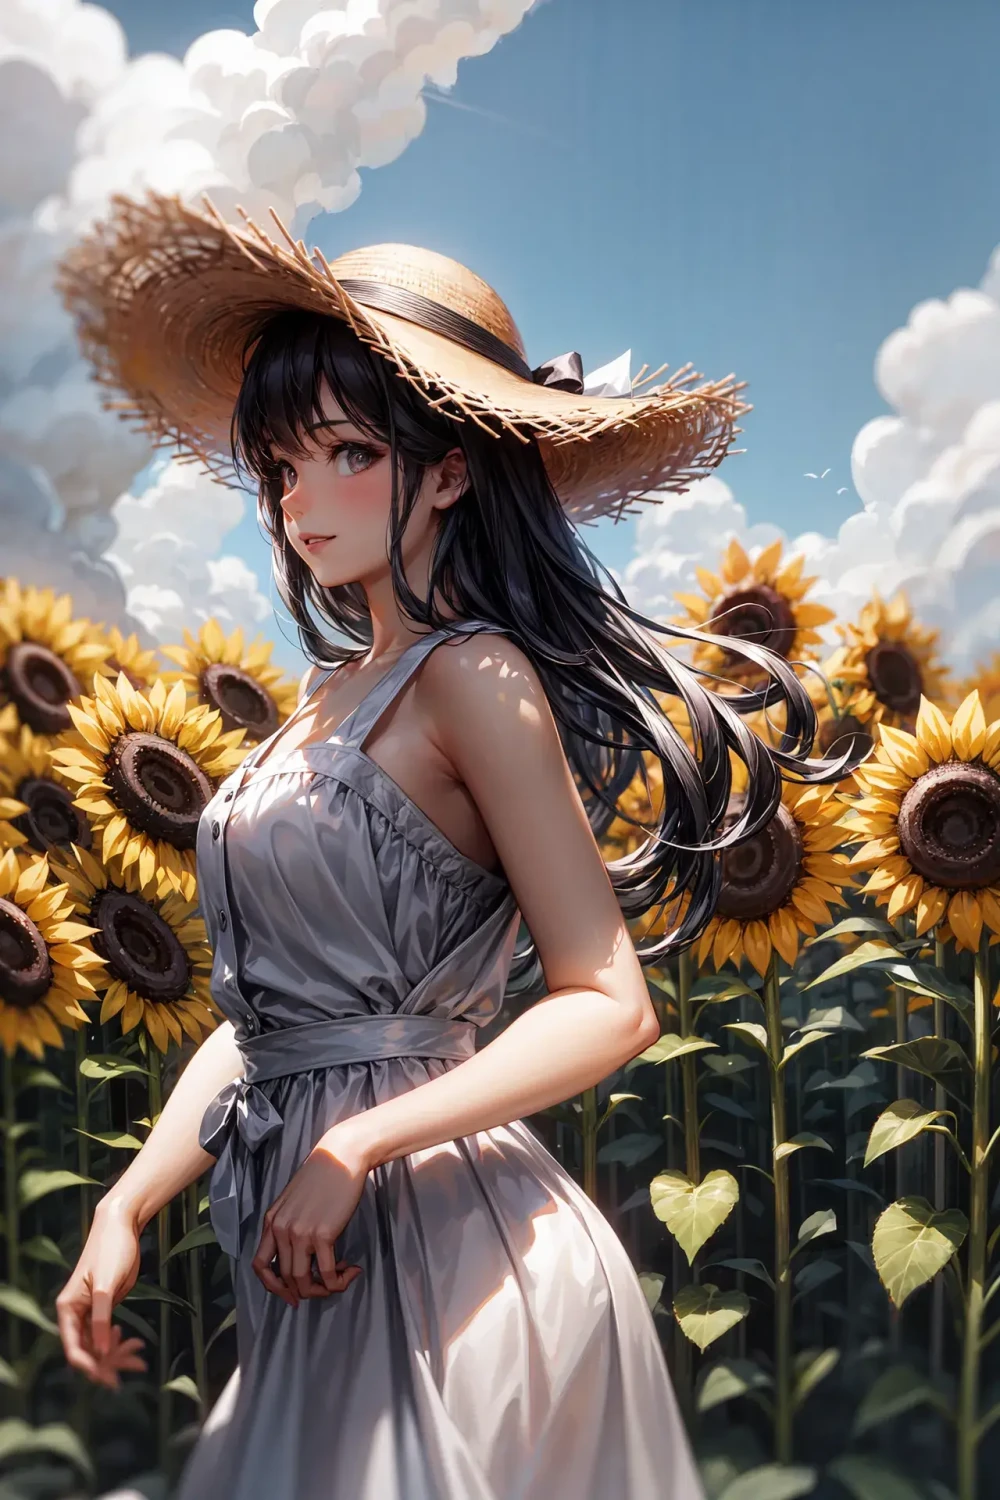 straw-hat -anime-style-all-ages-26